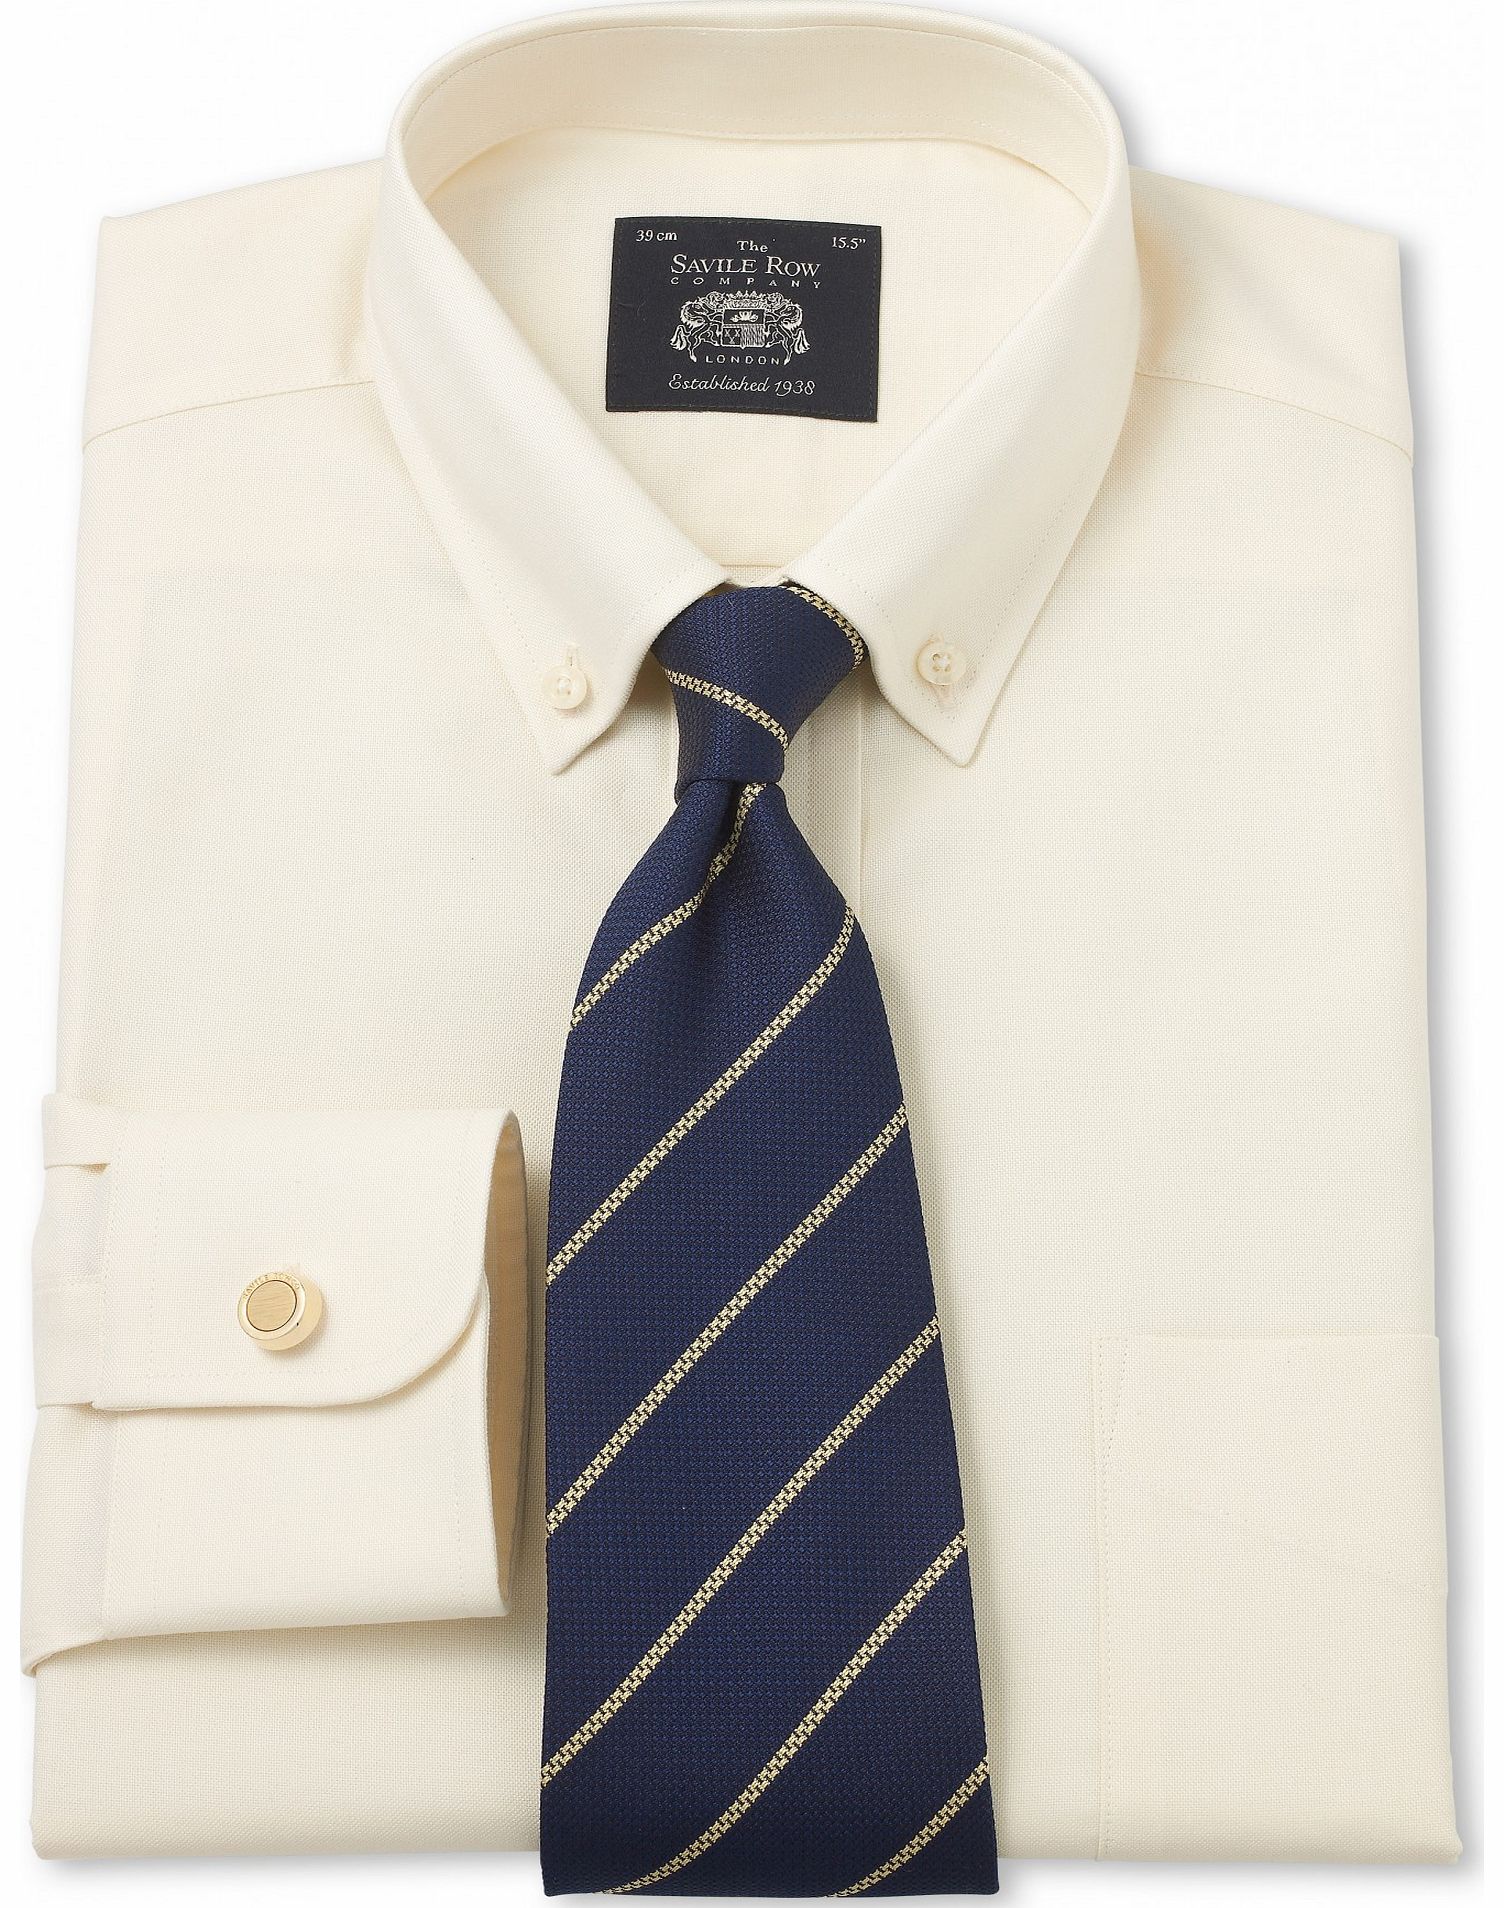 Savile Row Company Cream Pinpoint Classic Fit Shirt 18`` Lengthened